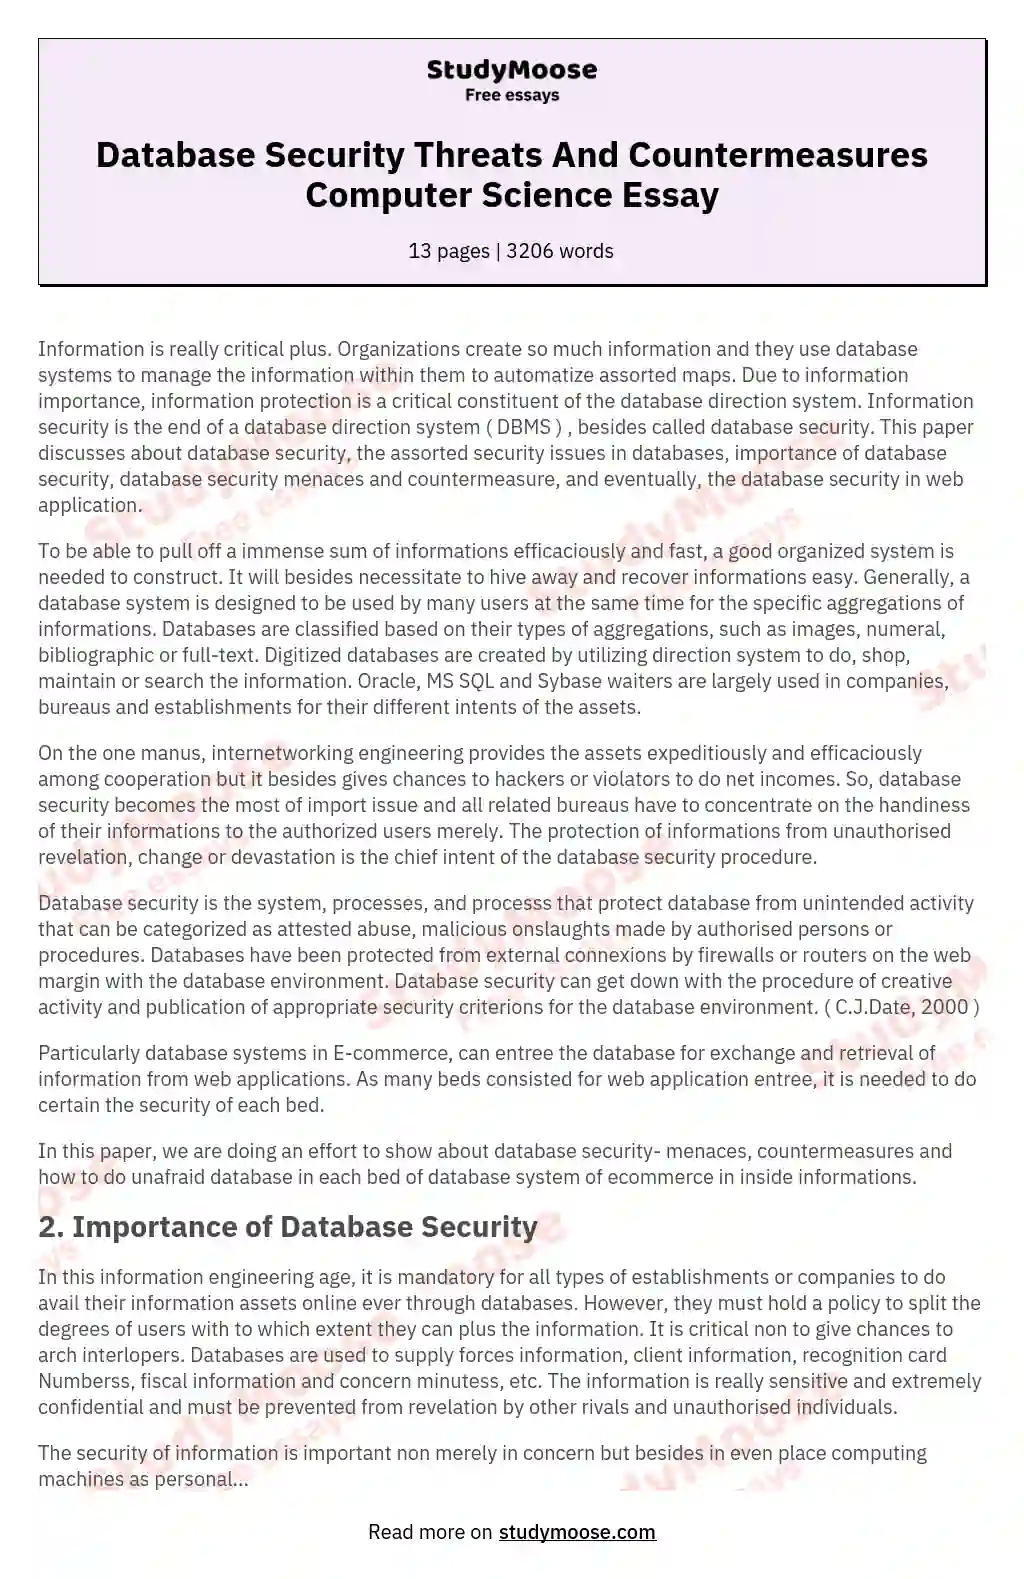 Database Security Threats And Countermeasures Computer Science Essay